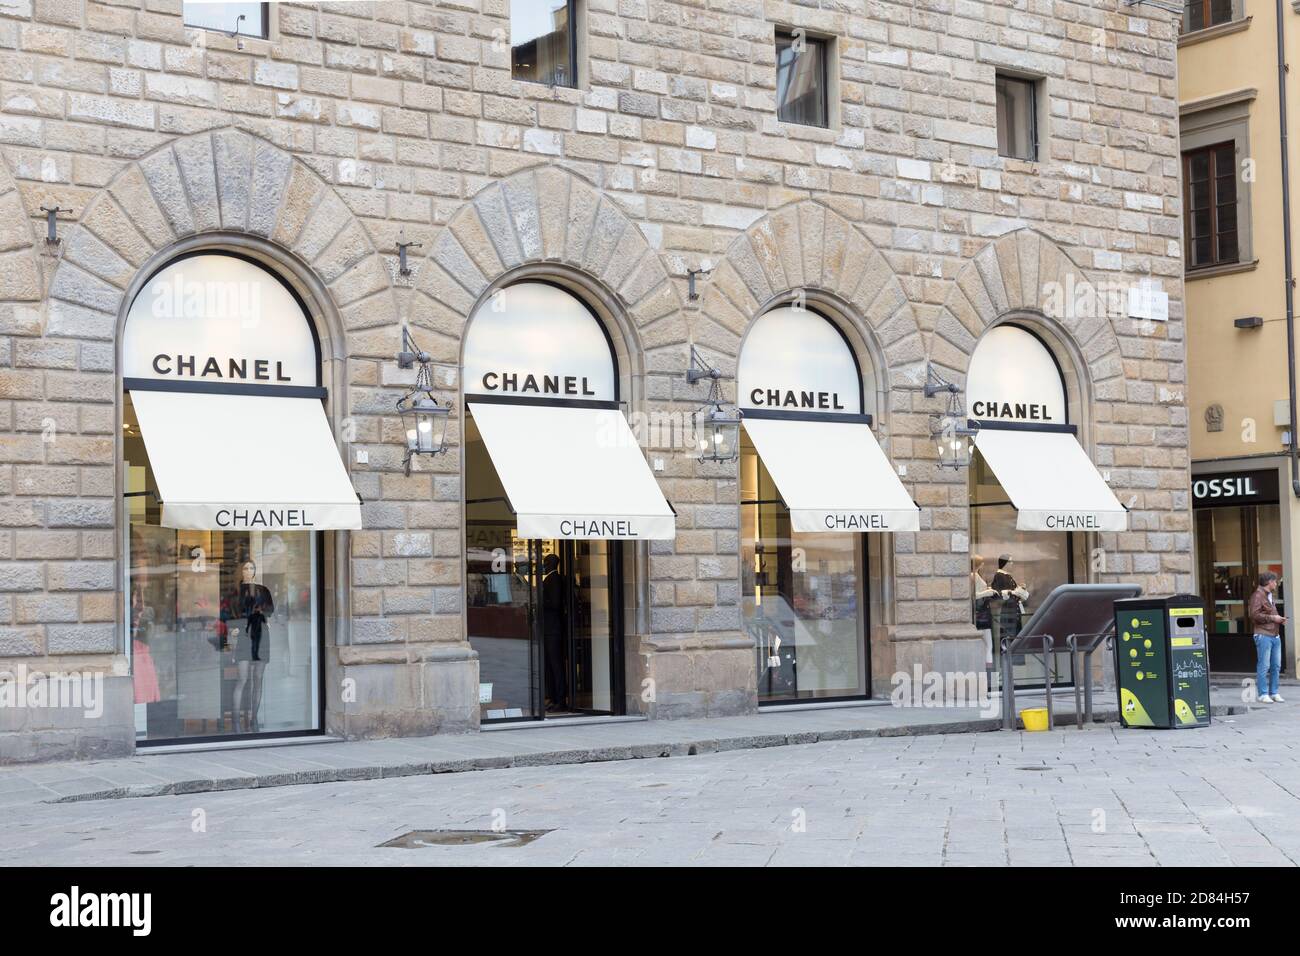 Chanel shop front, Italy Stock Photo